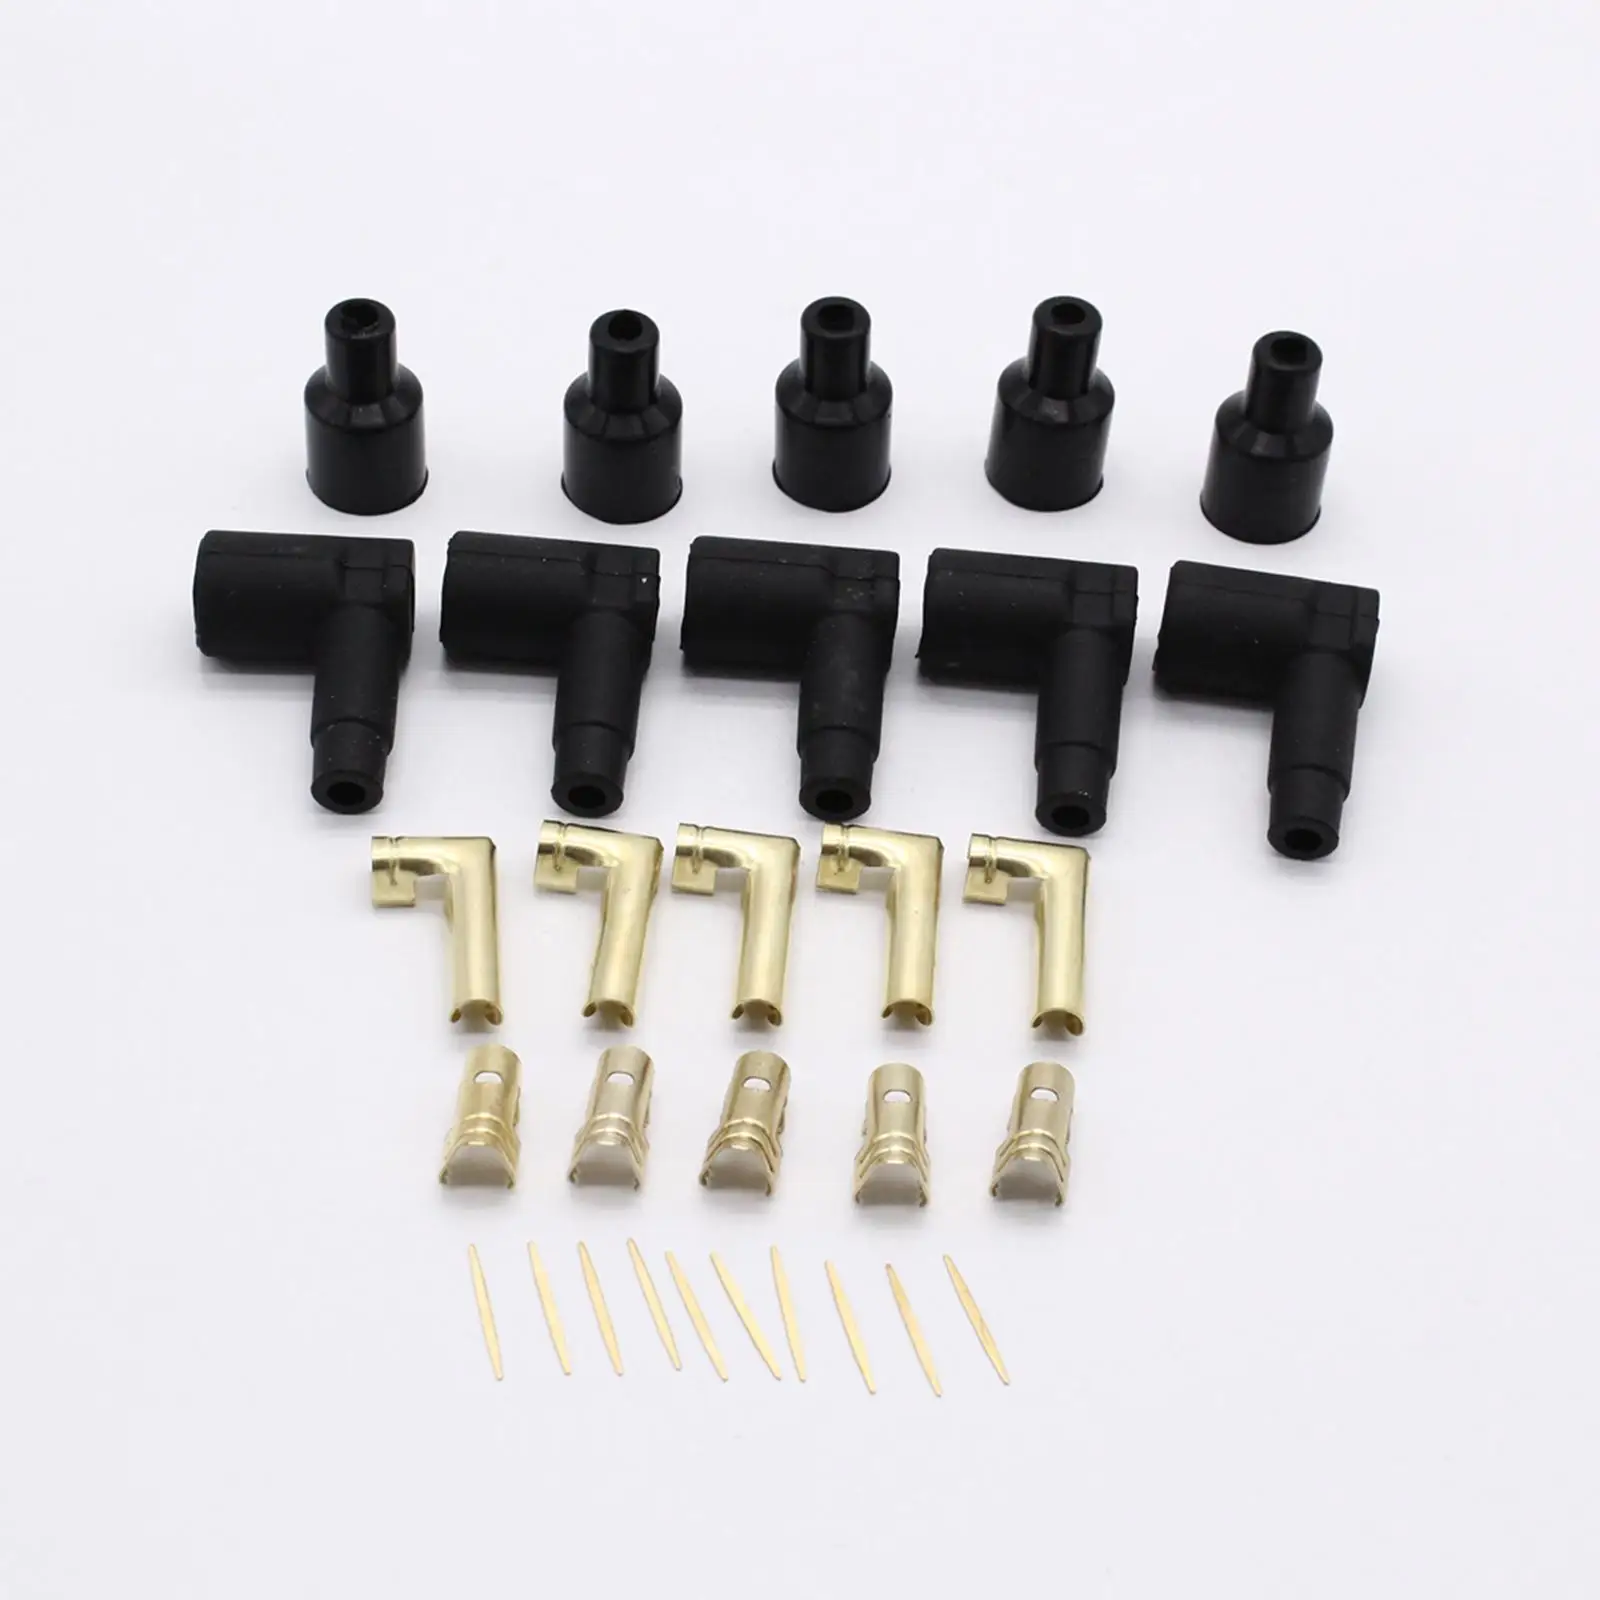 5 Pieces Coil Spark Plug Coil Boot Terminal Set Push On Terminal Ignition Wires Accessories Durable Direct Replaces Professional